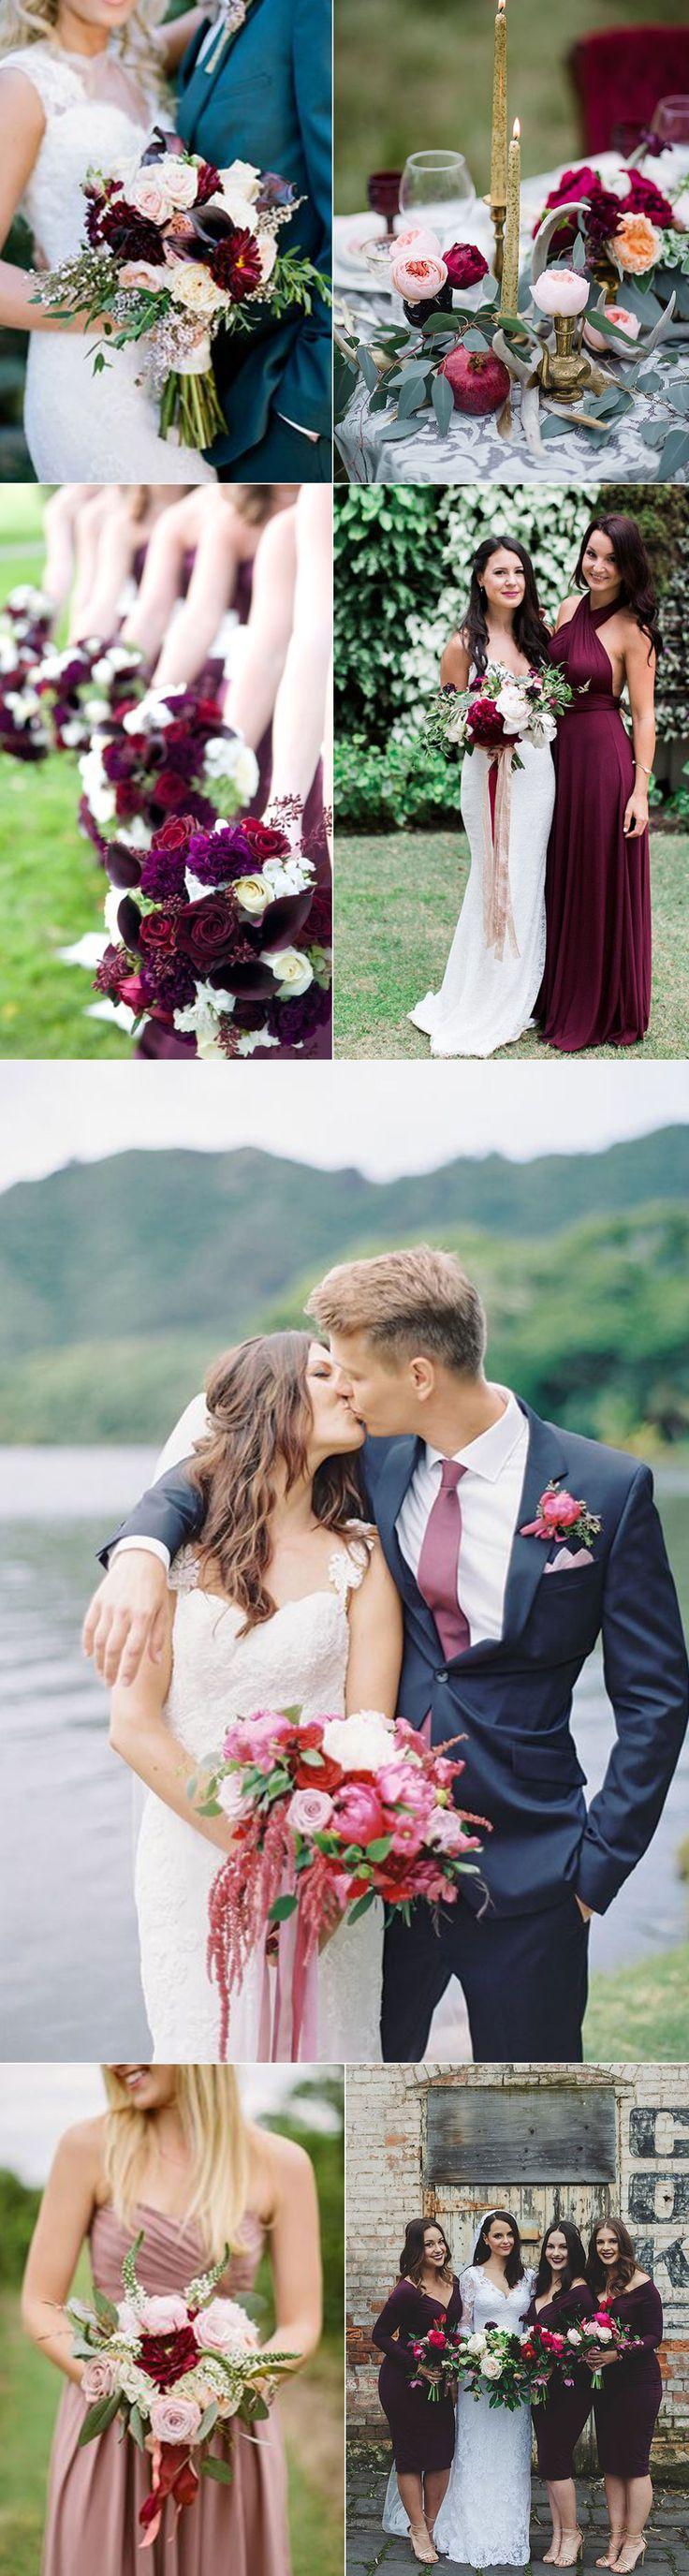 Wedding - Wedding Inspiration For Plums And Pinks   